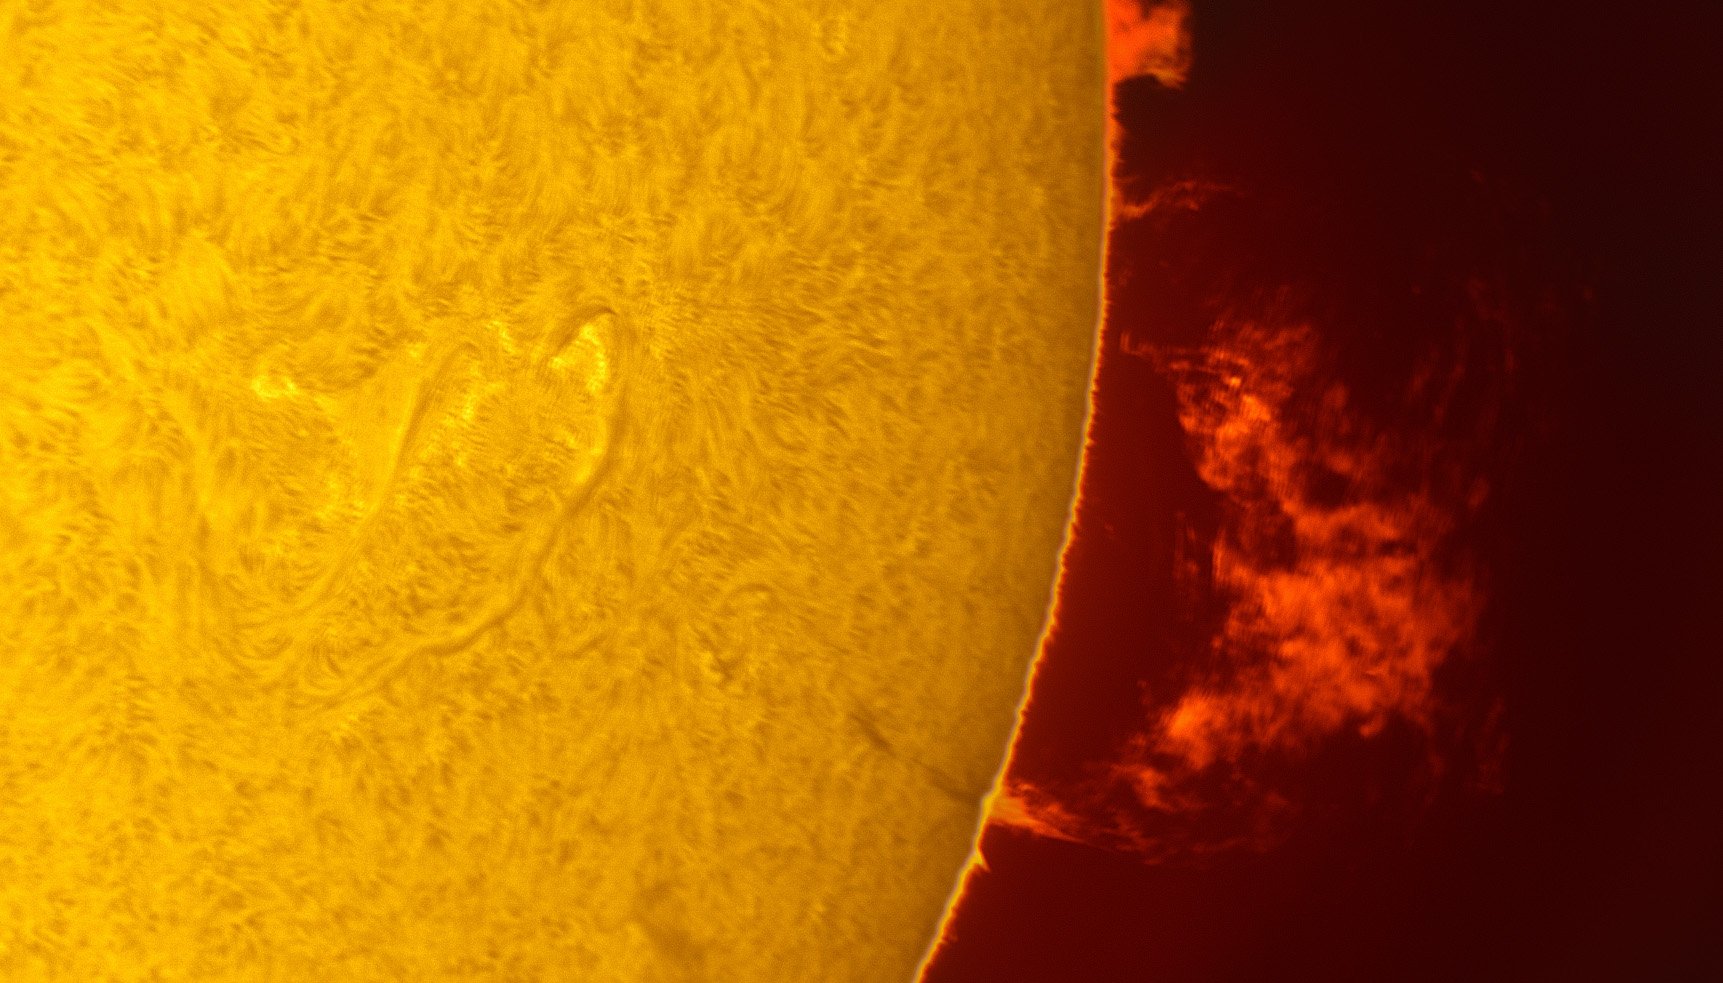 The prominence continued to put on a fantastic show on August 4, 2022